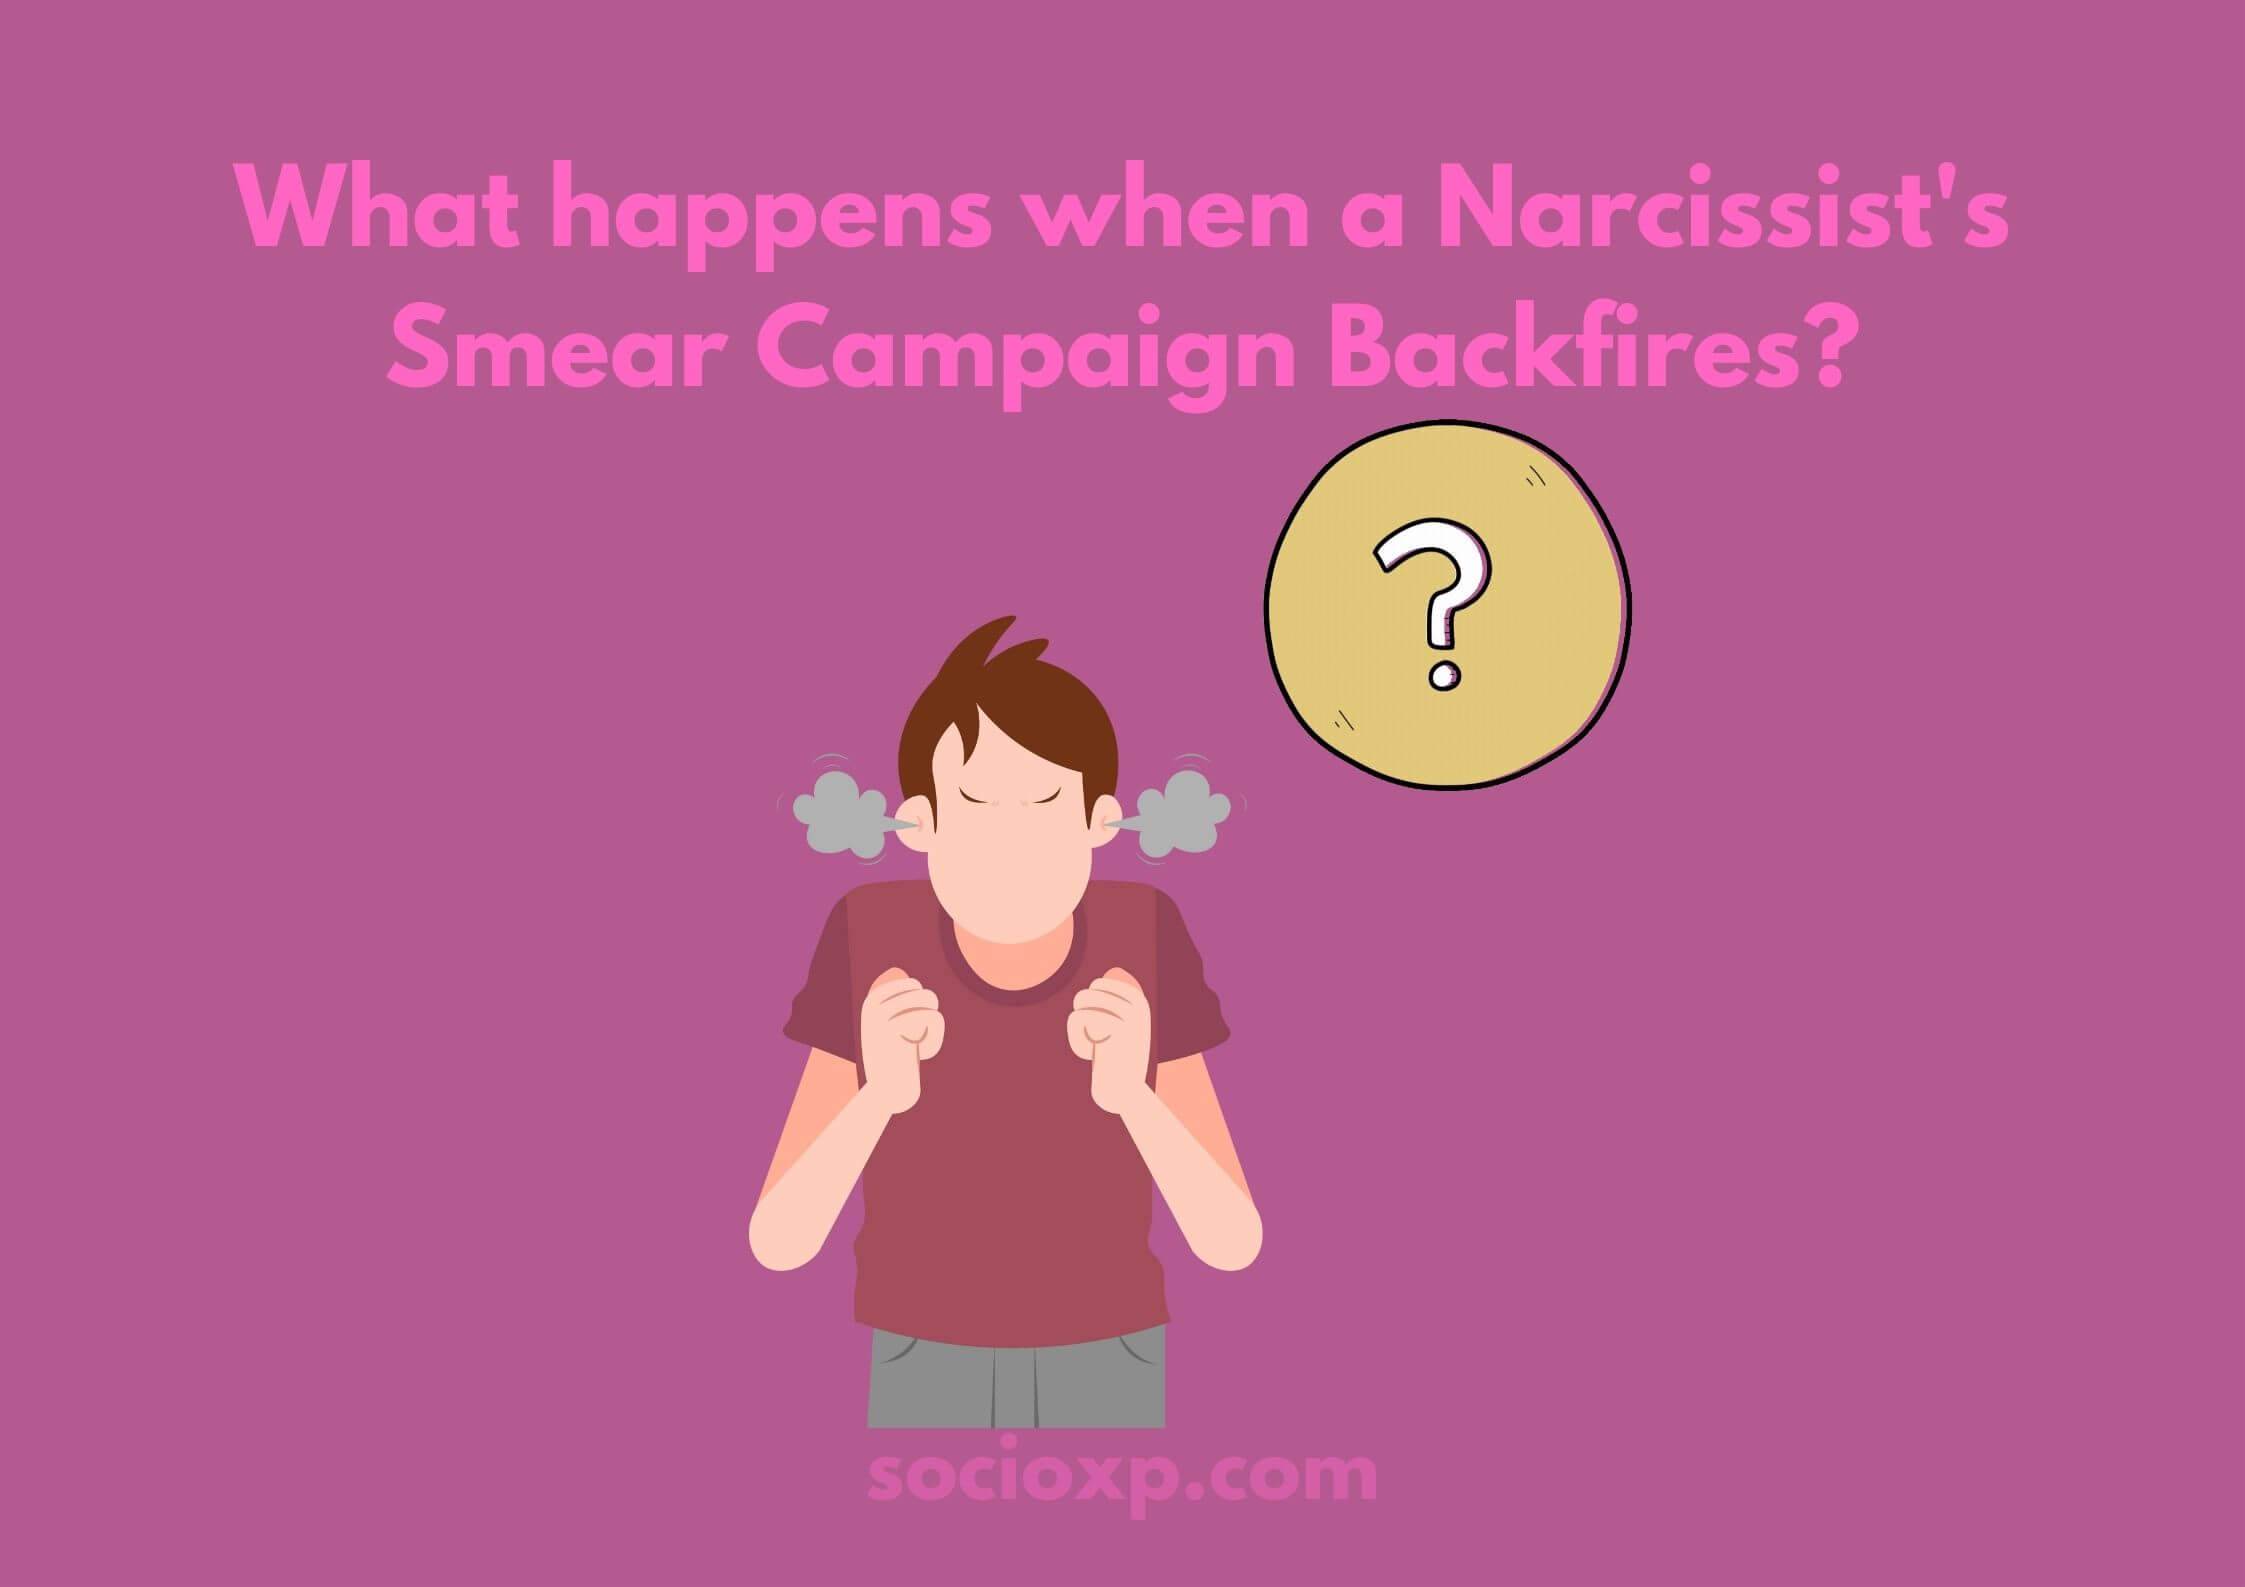 What Happens When A Narcissist's Smear Campaign Backfires?